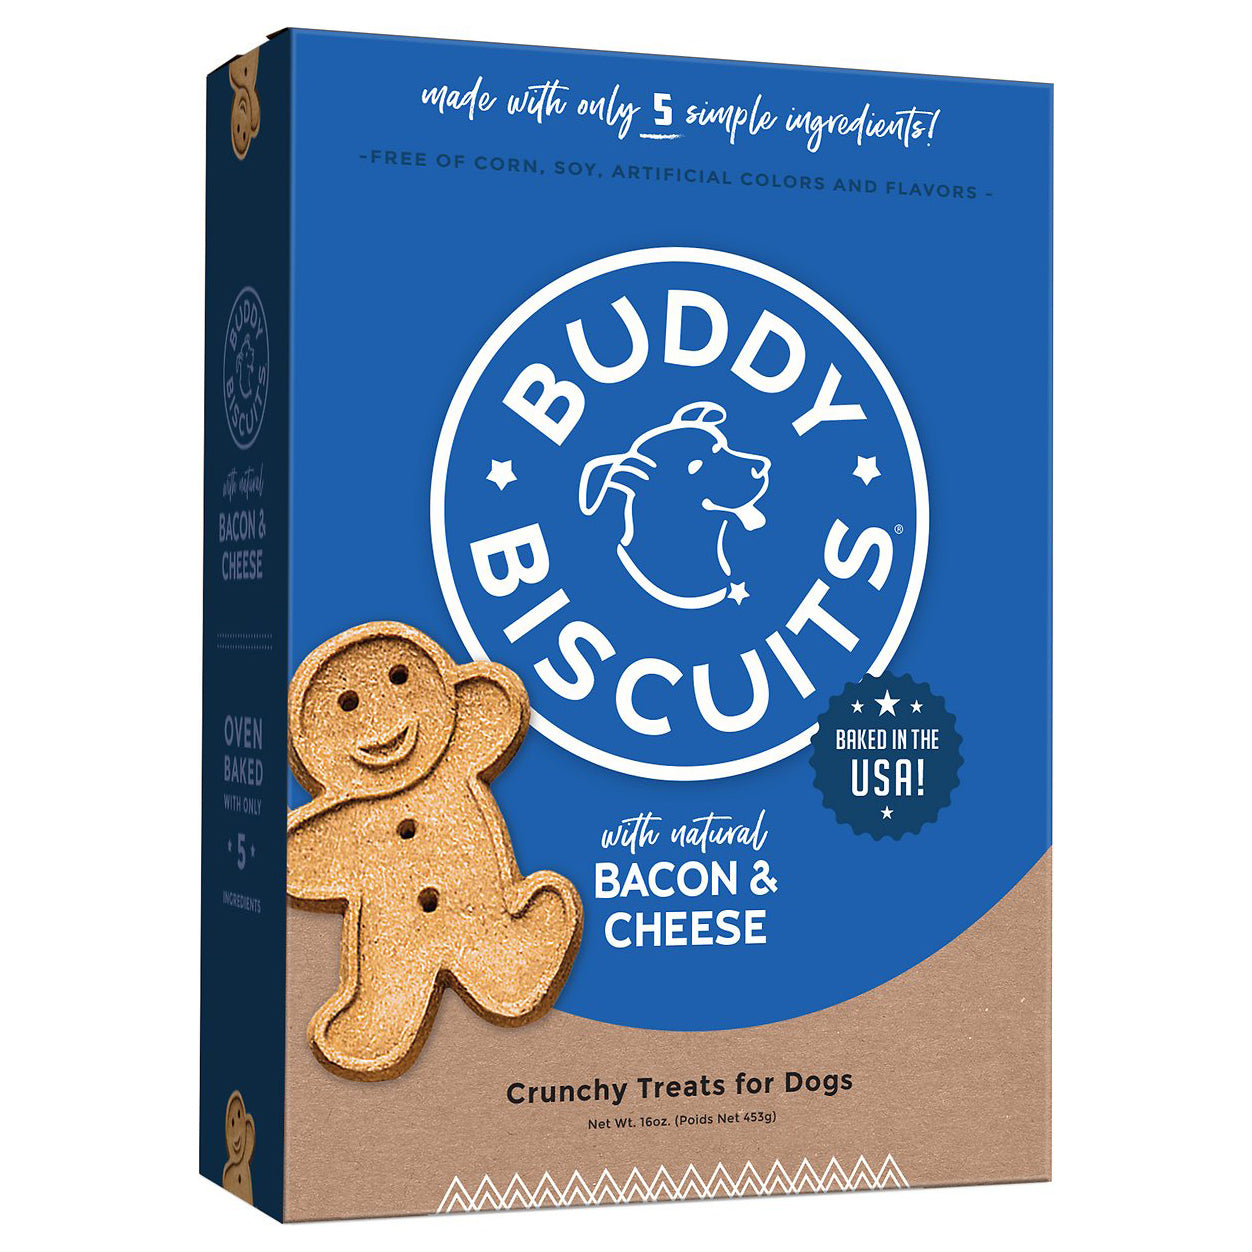 Cloudstar Buddy Biscuits Bacon And Cheese 16 OZ